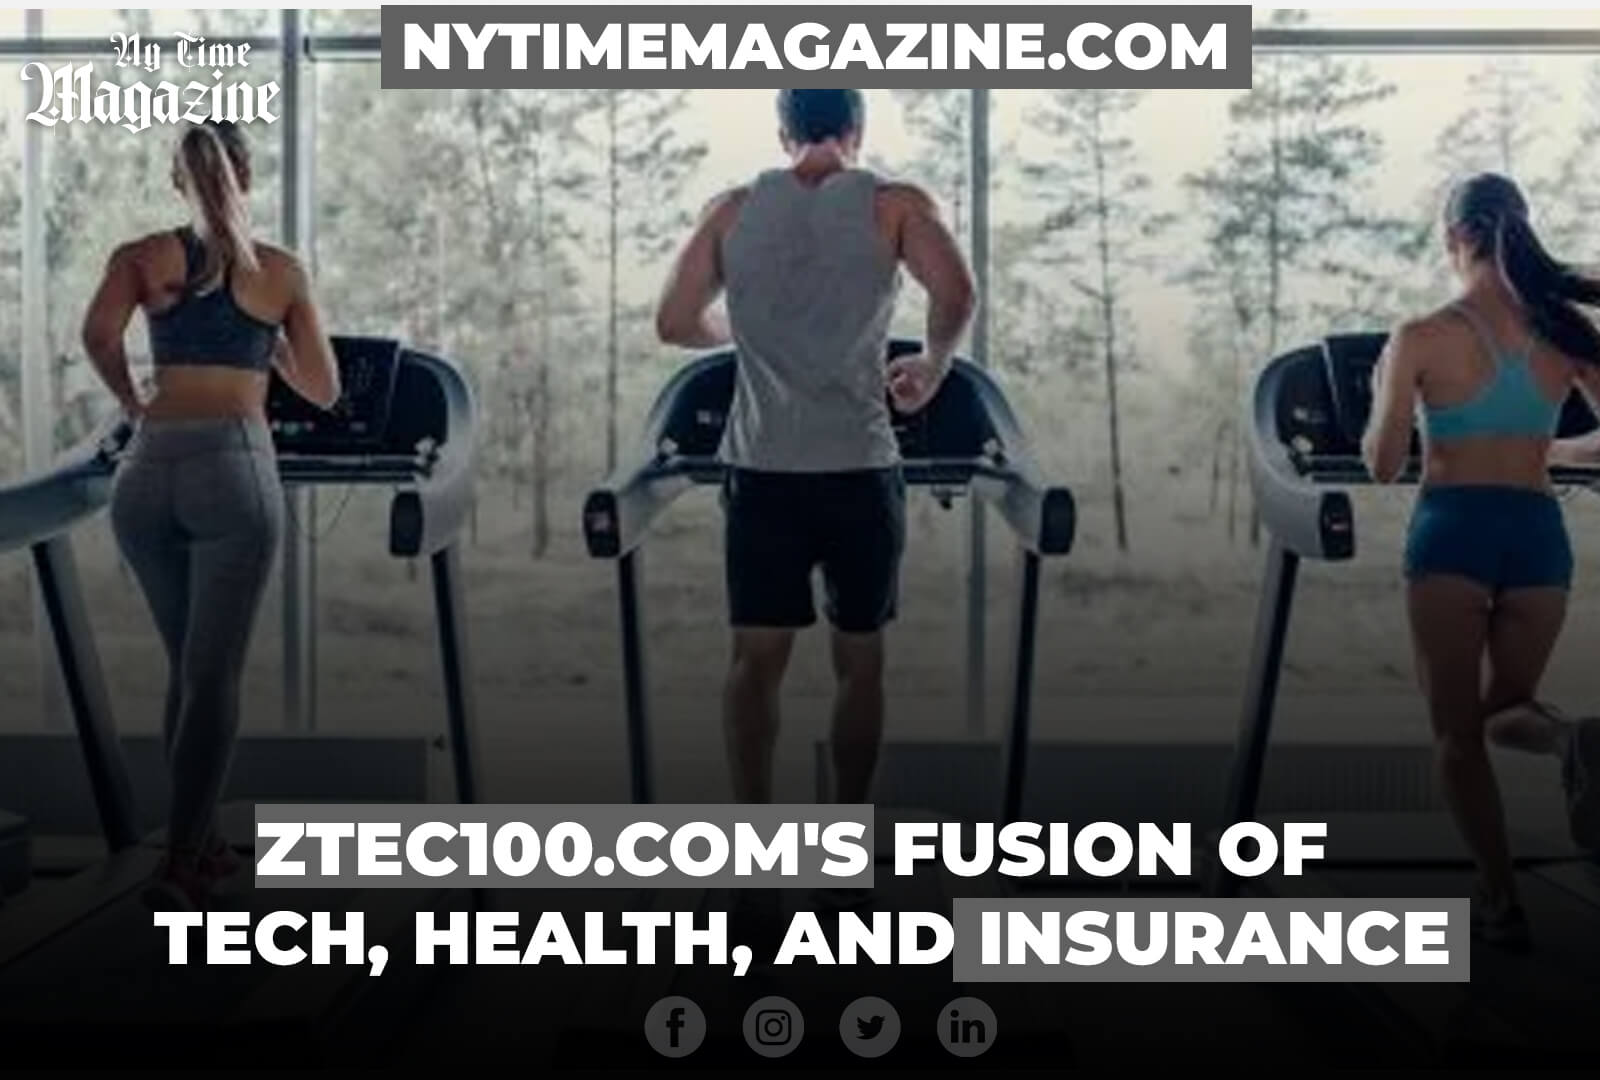 ZTEC100.COM' S FUSION OF TECH, HEALTH, AND INSURANCE